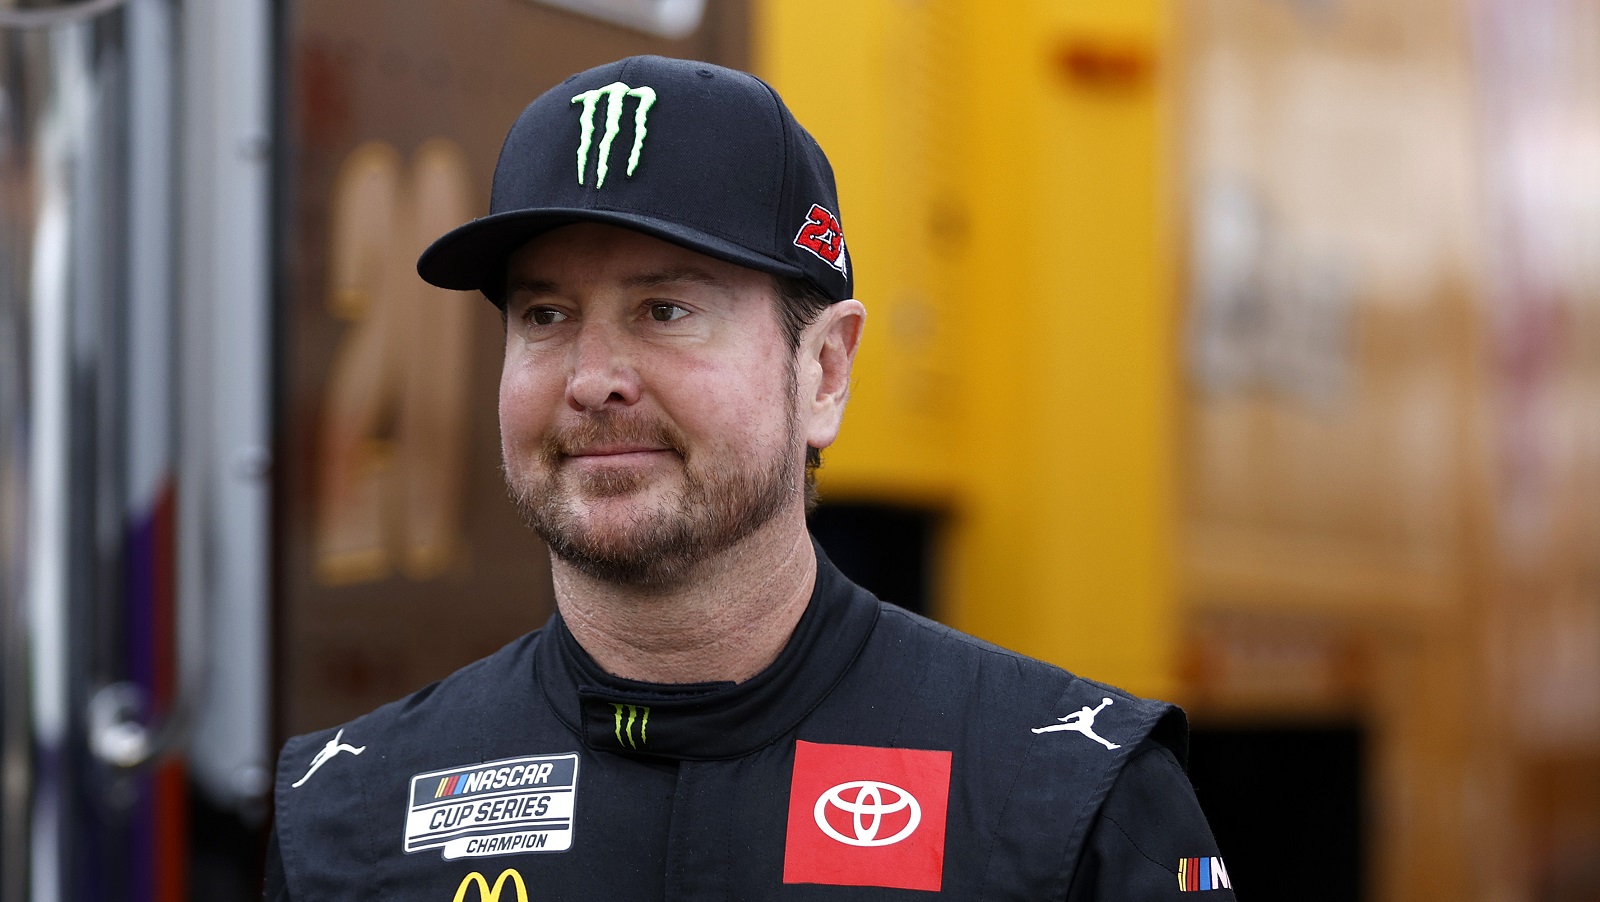 Kurt Busch walks to the track prior to the NASCAR Cup Series Food City Dirt Race at Bristol Motor Speedway on April 17, 2022. | Chris Graythen/Getty Images